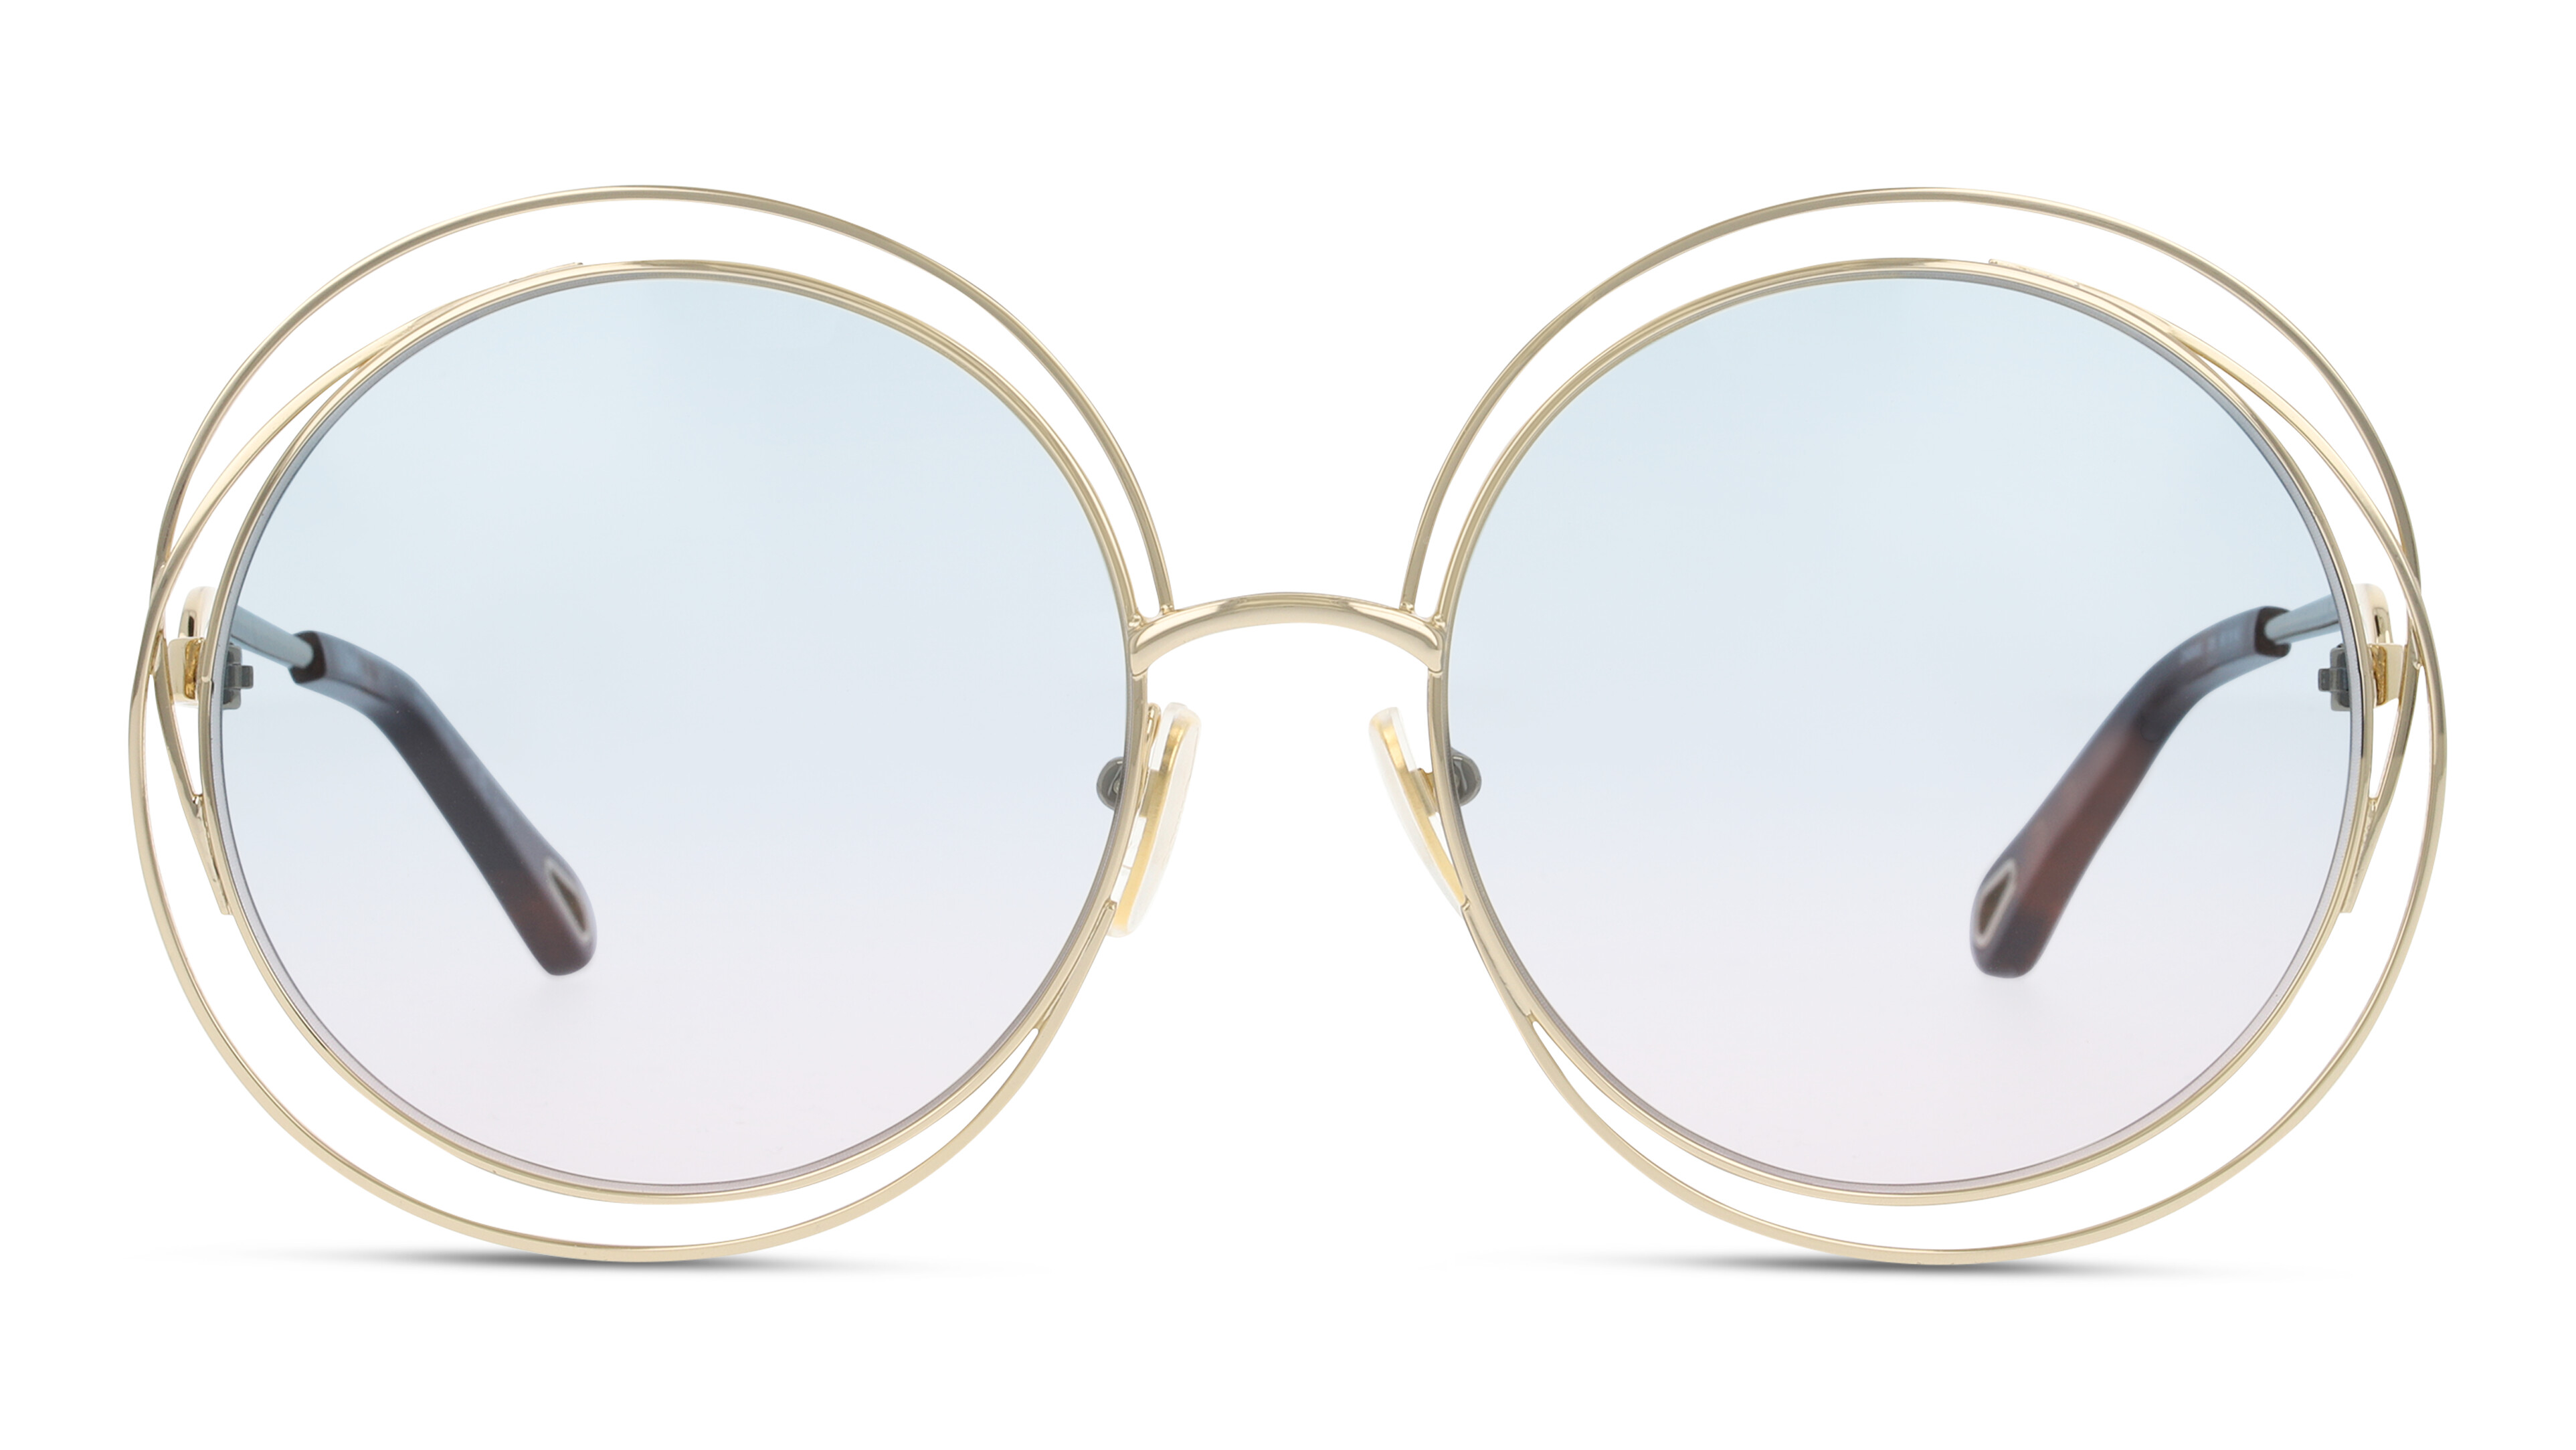 [products.image.front] Chloe CH0045S 006 Sonnenbrille